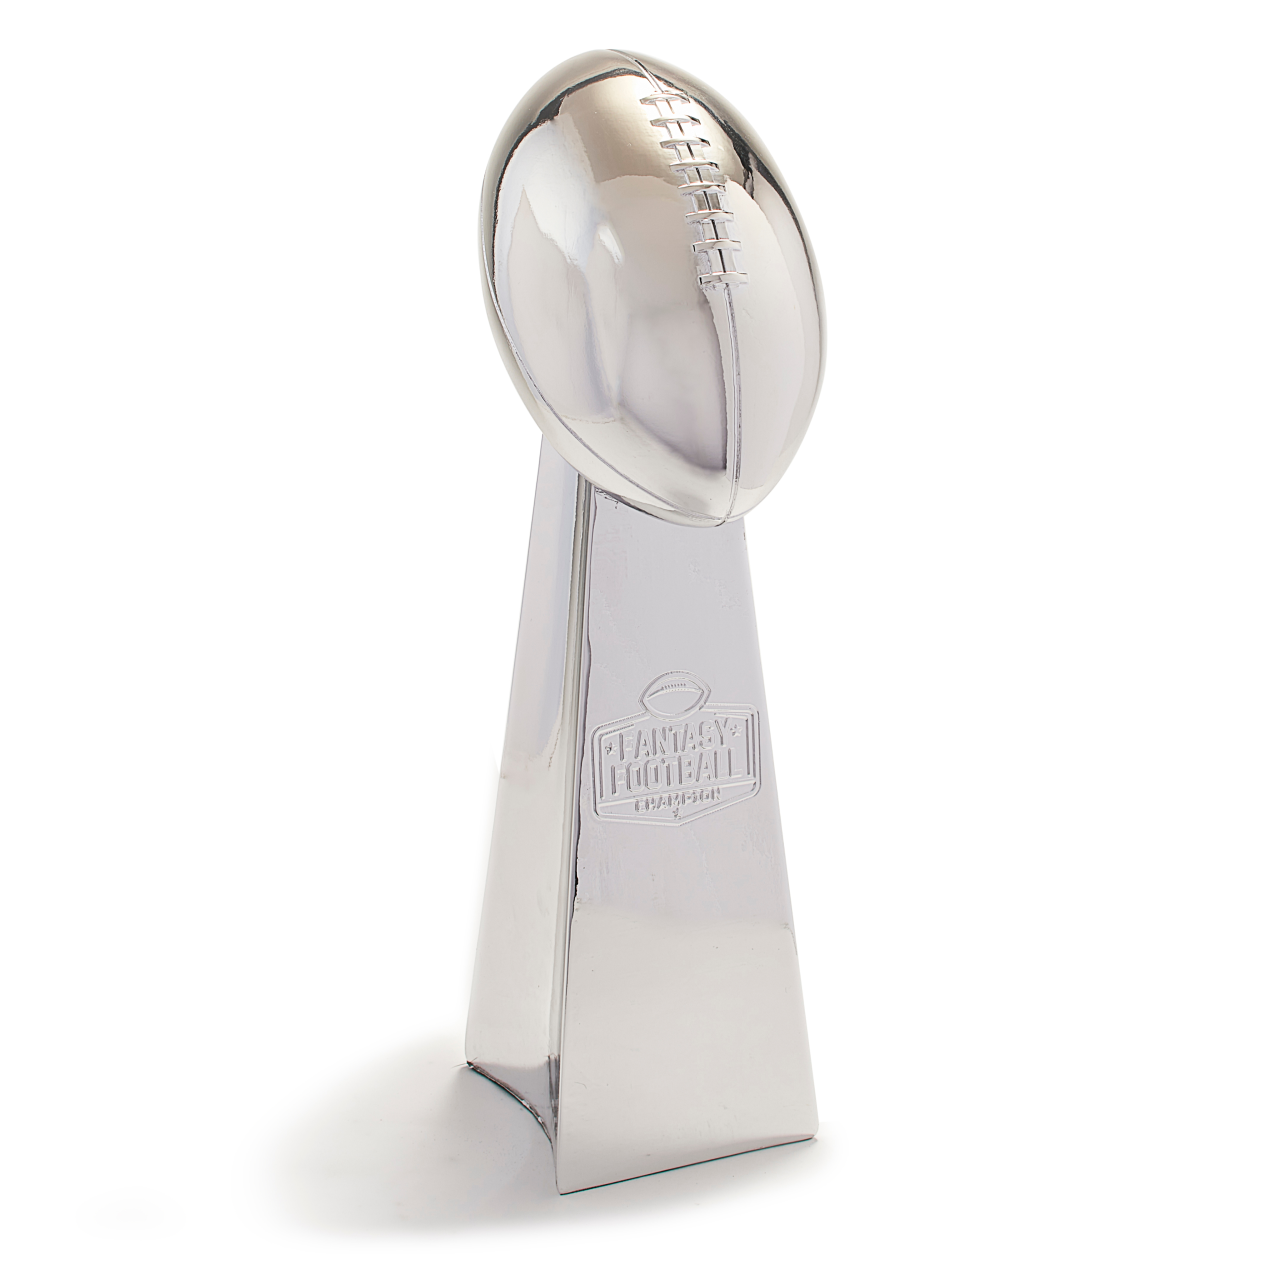 Chrome Reflective Fantasy Football Trophy For League Champions | Comes In 2 Sizes